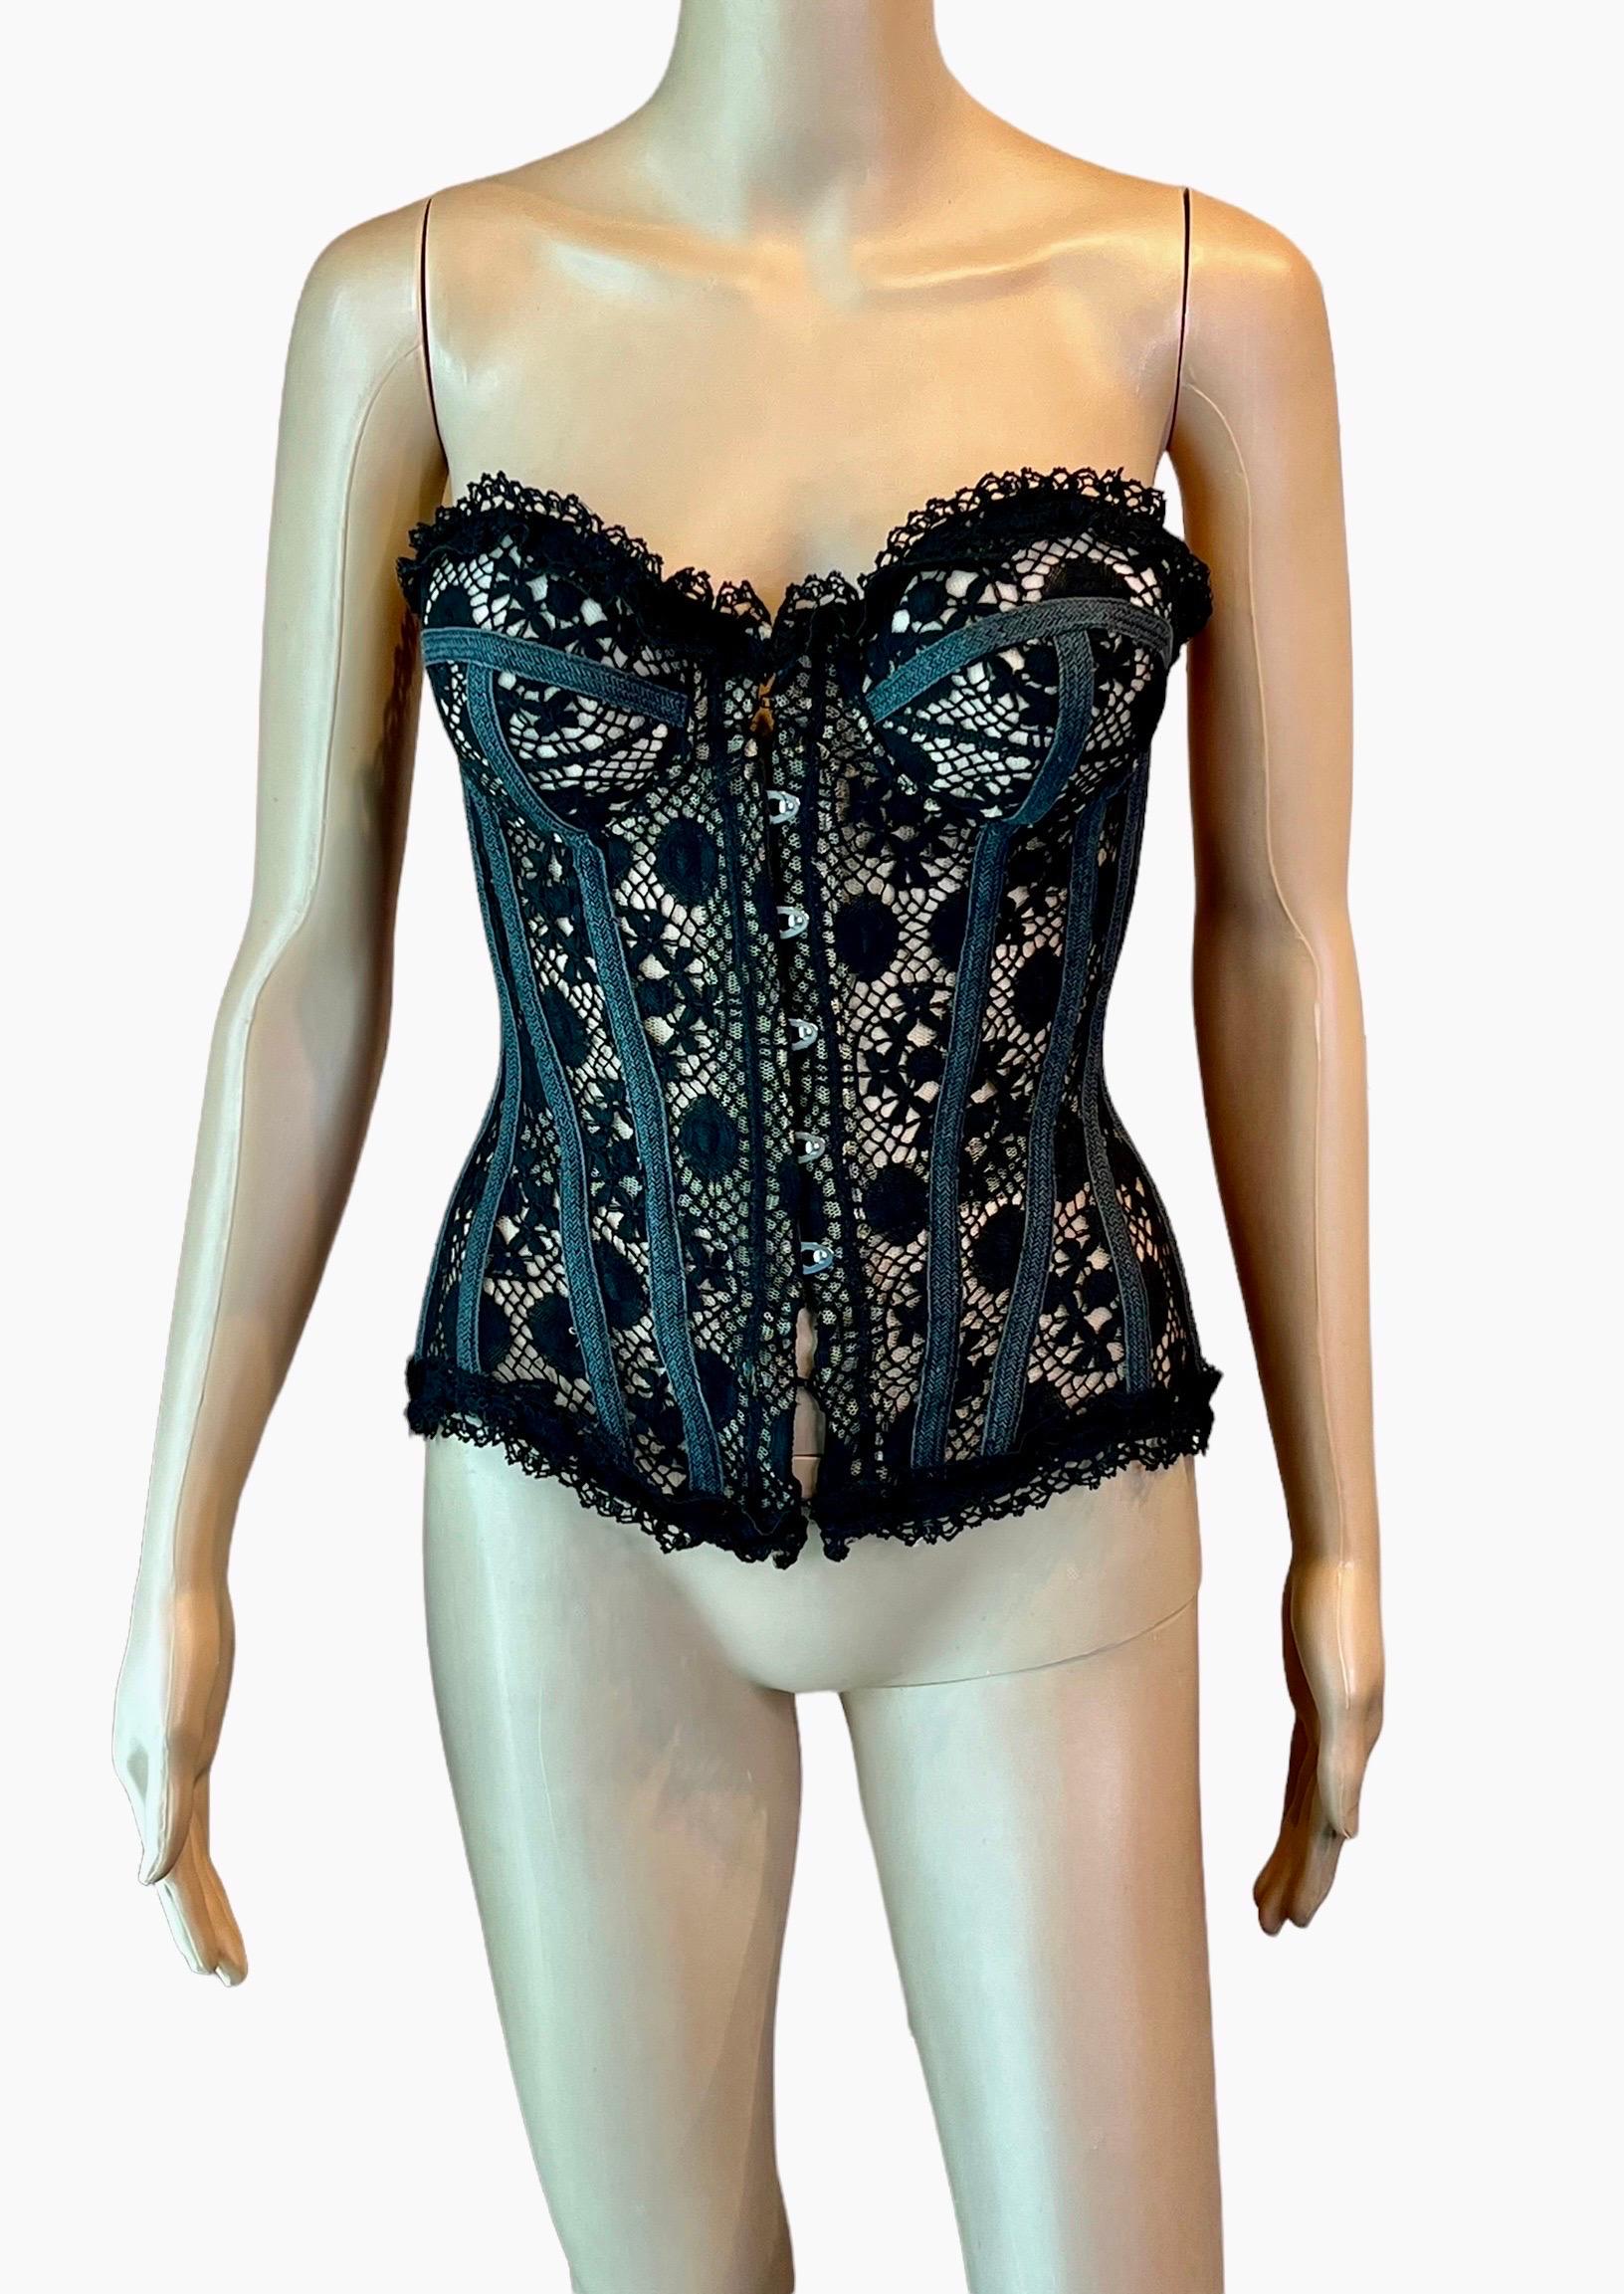 Jean Paul Gaultier S/S 2006 Runway Sheer Black Bustier Corset Lace Up Top In Good Condition For Sale In Naples, FL